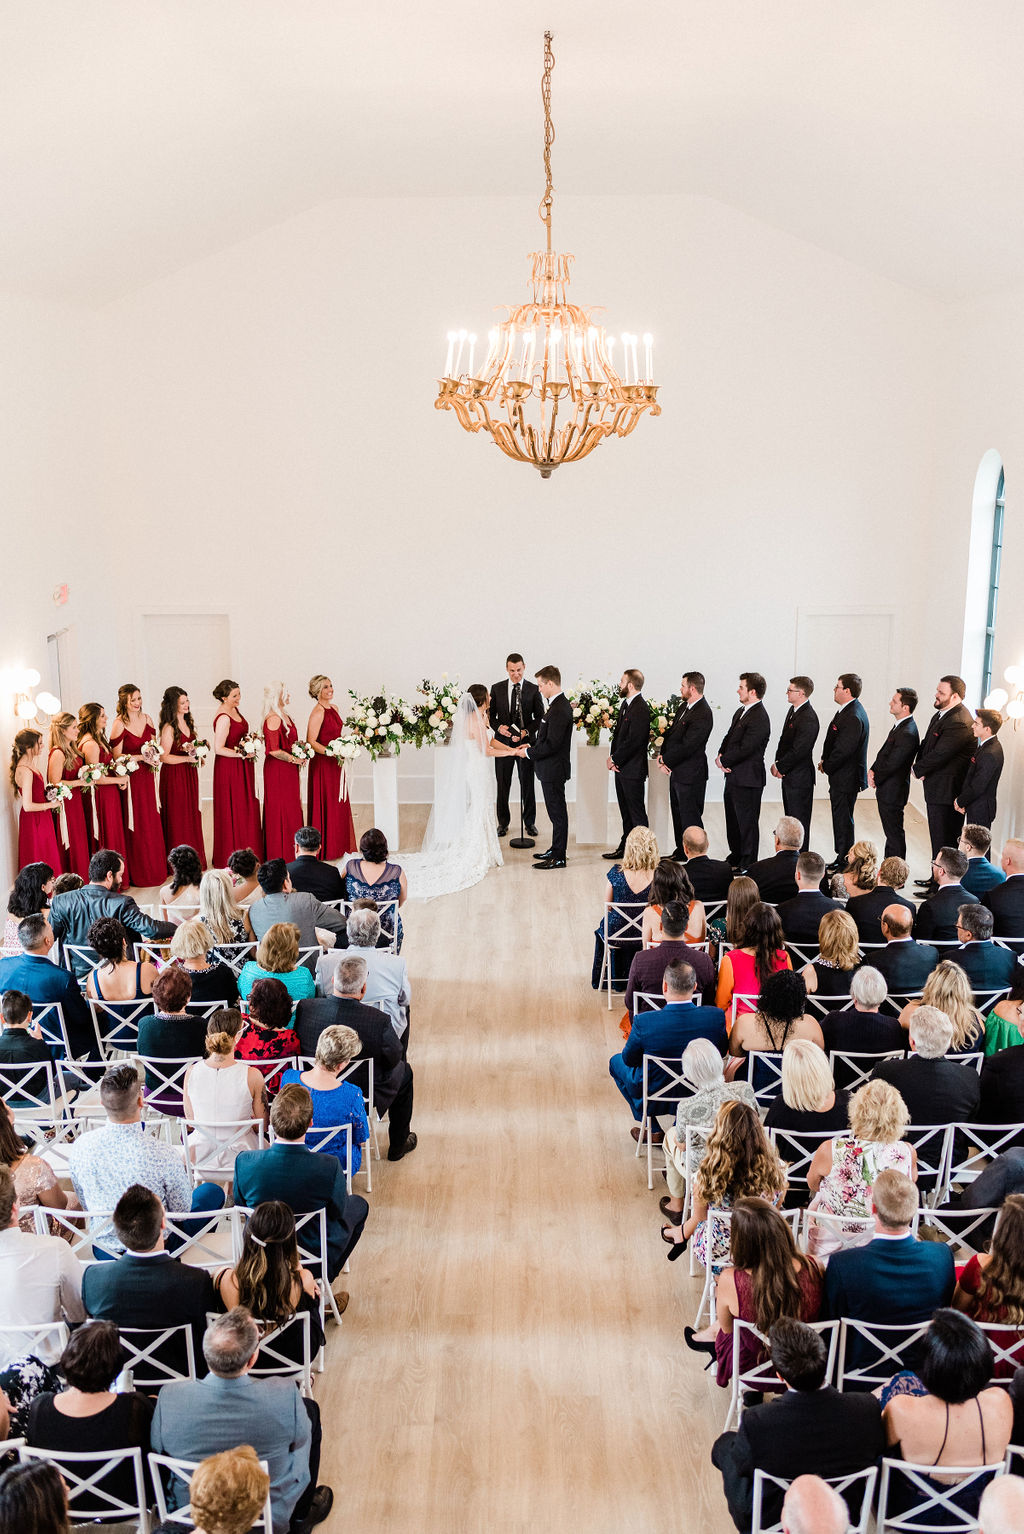 A wedding ceremony taking place at the Loft 310 Chapel in Kalamazoo, Michigan